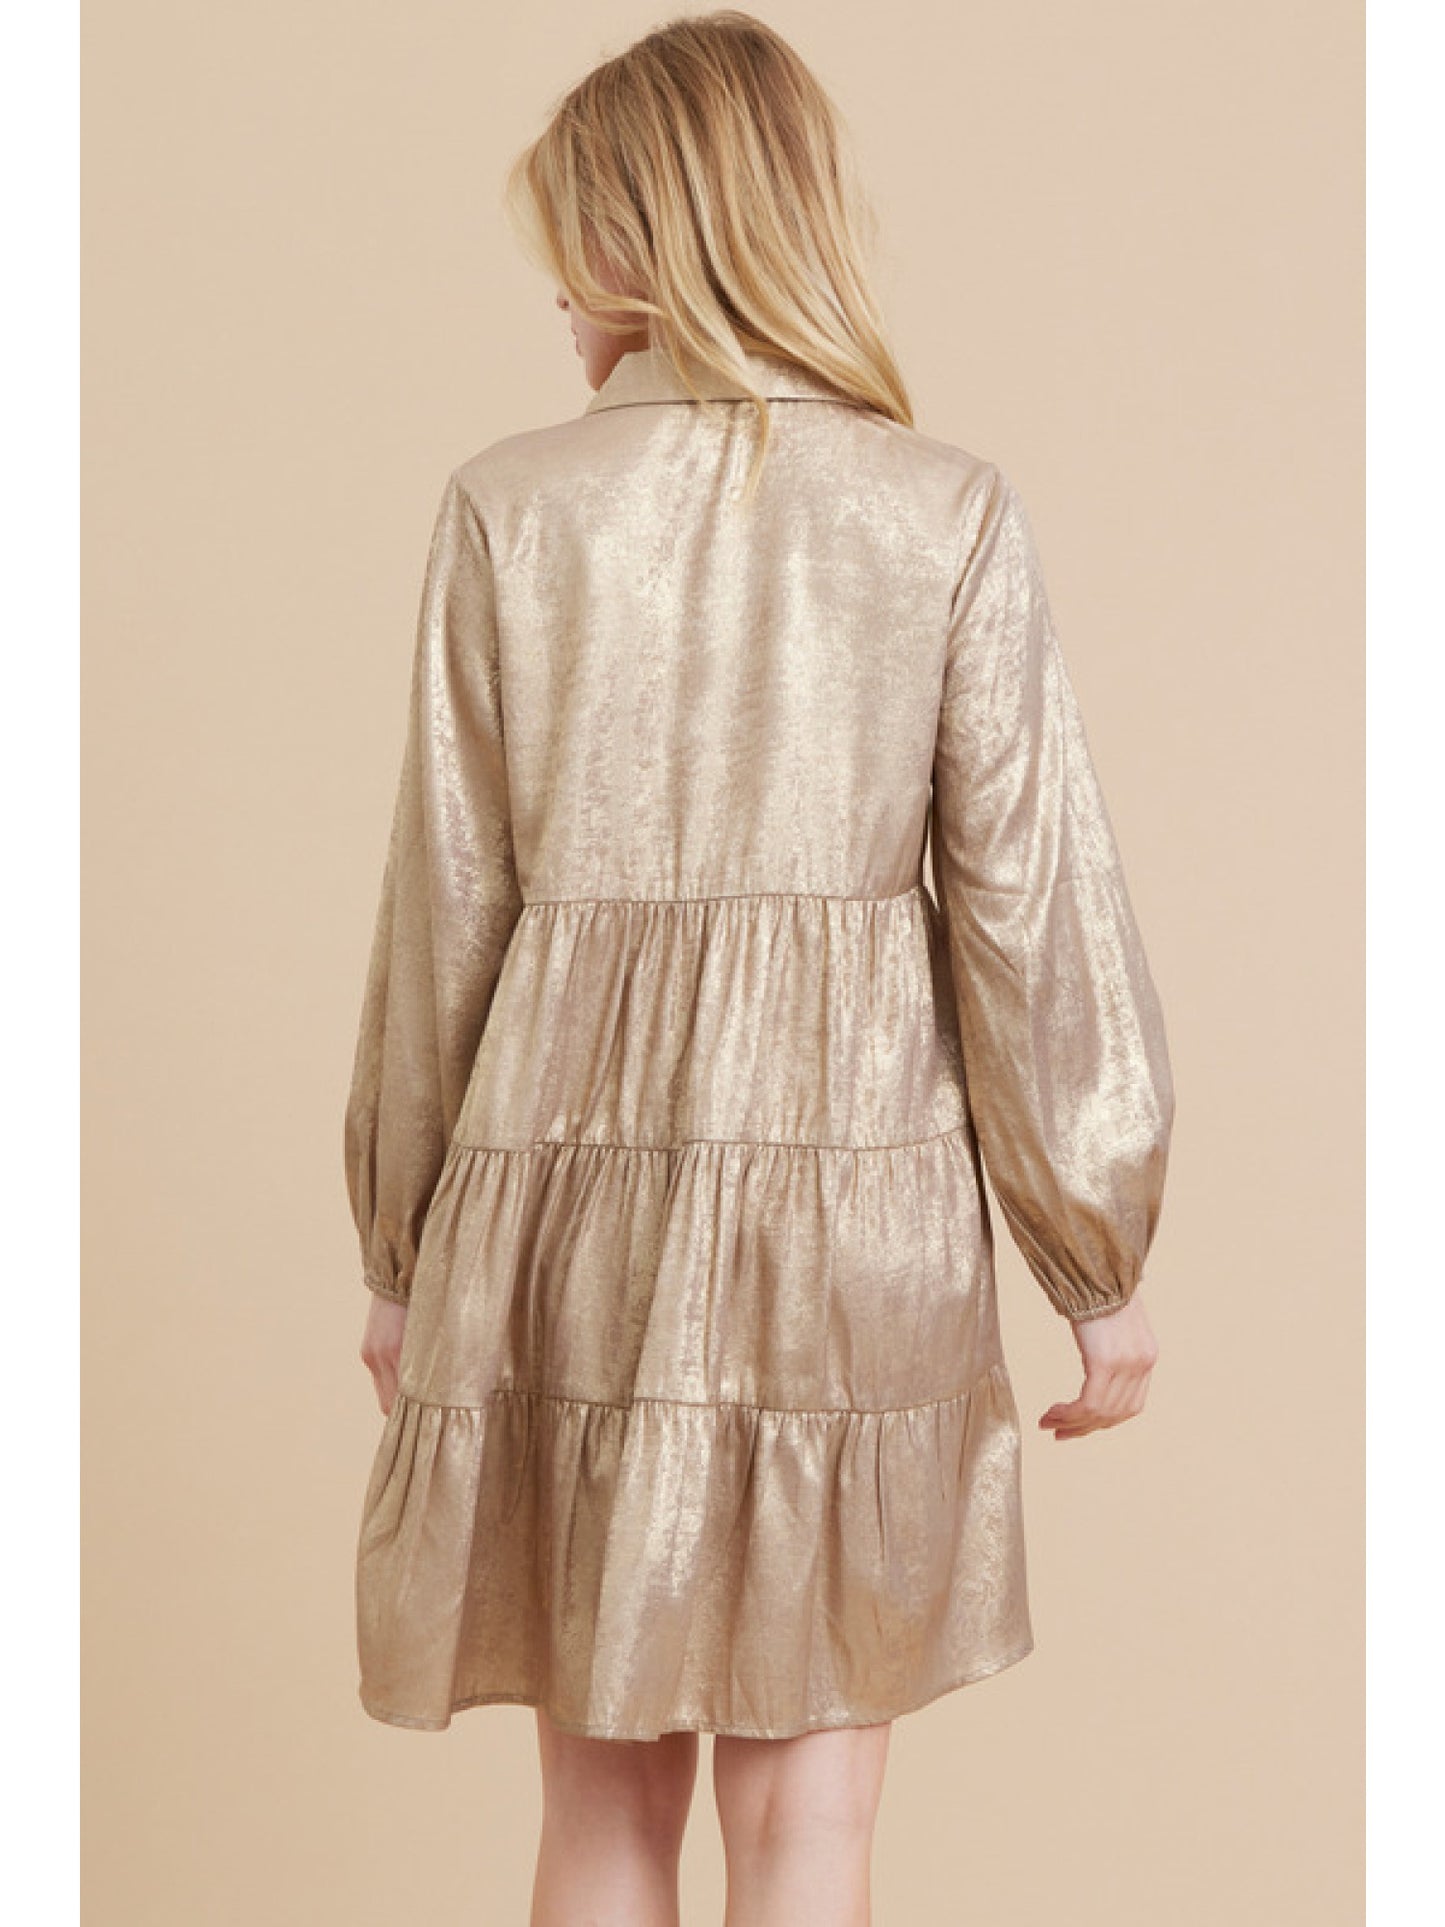 Metallic Baby Doll Dress in Taupe